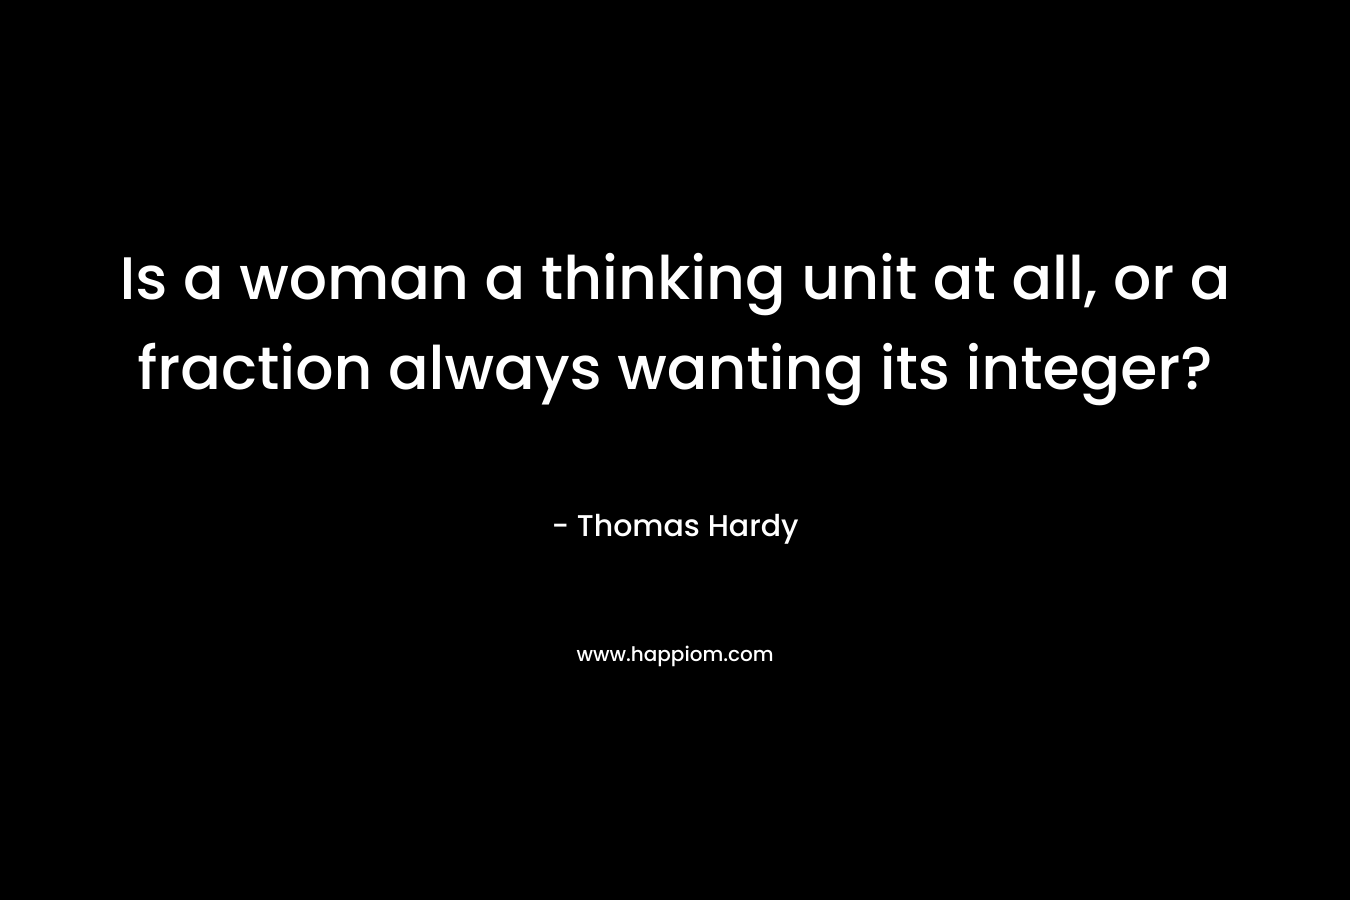 Is a woman a thinking unit at all, or a fraction always wanting its integer?